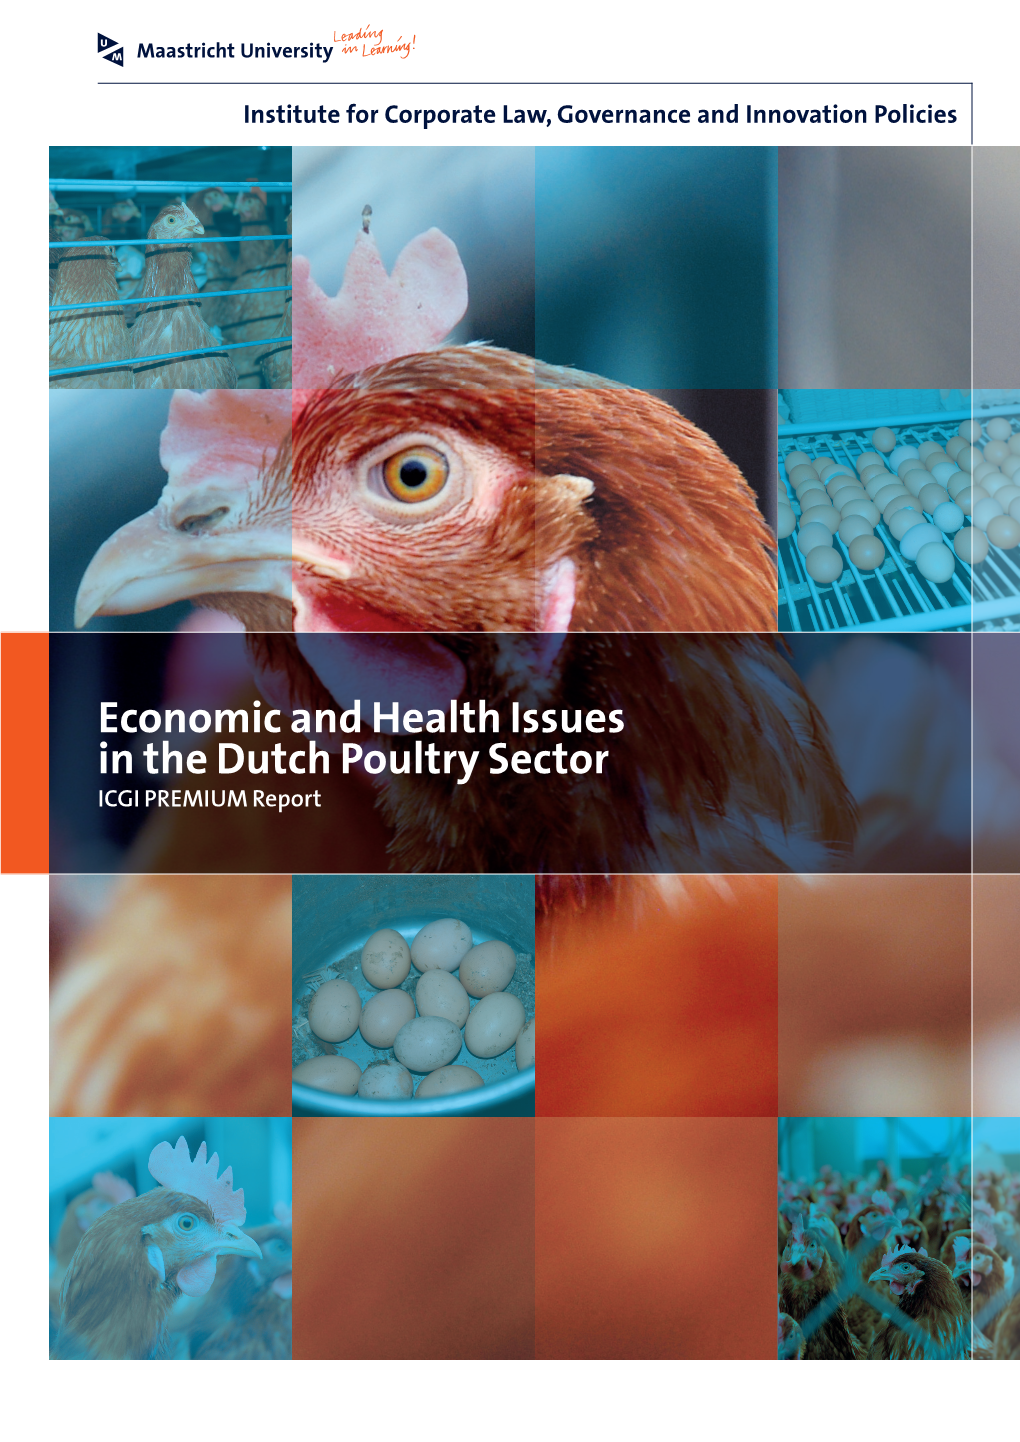 Economic and Health Issues in the Dutch Poultry Sector